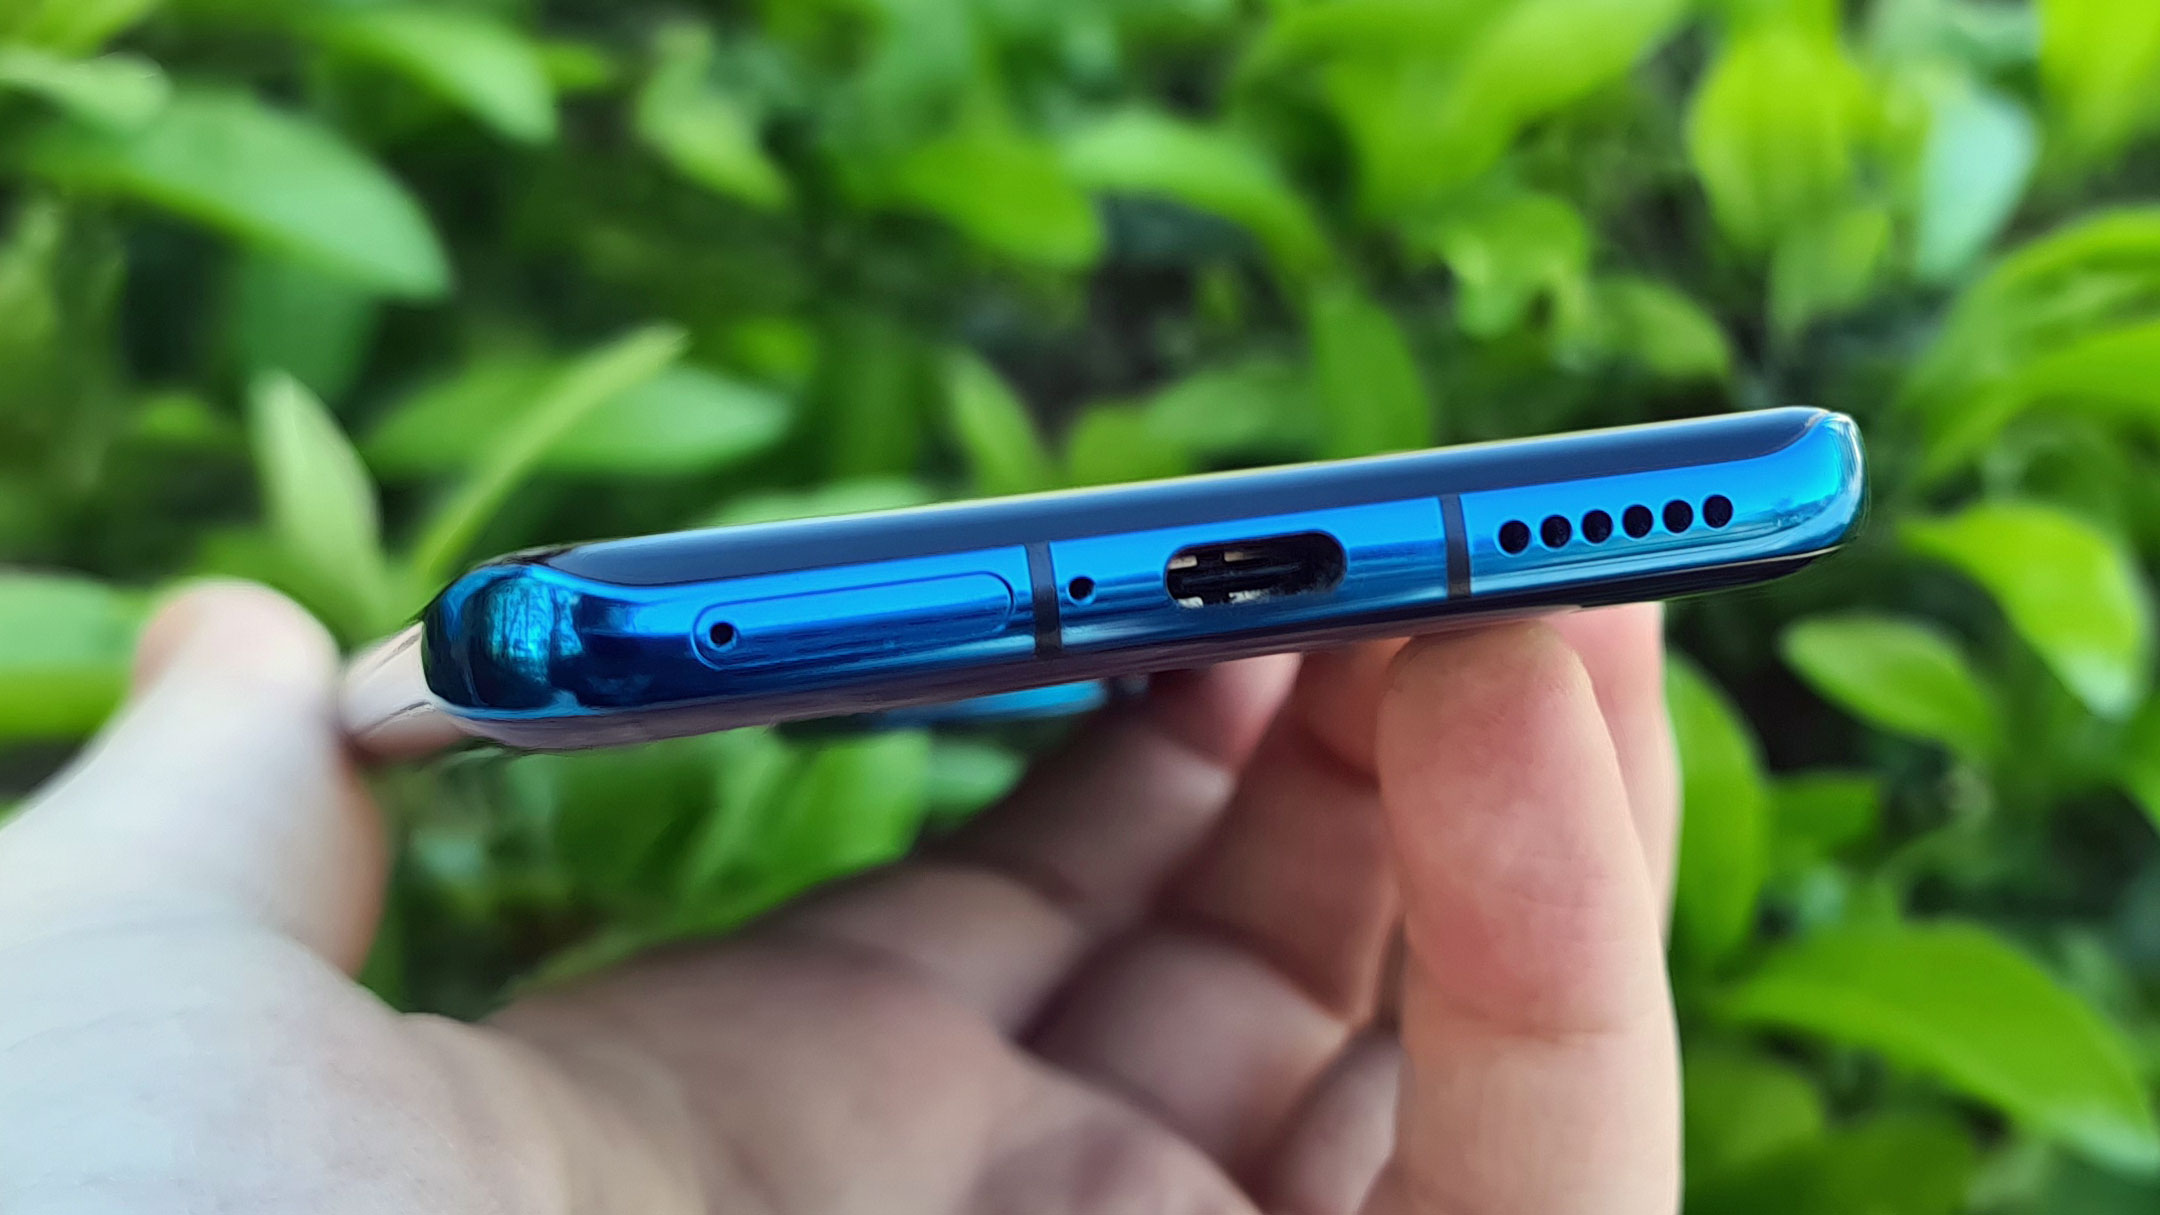 The bottom edge of a Huawei P40 Pro